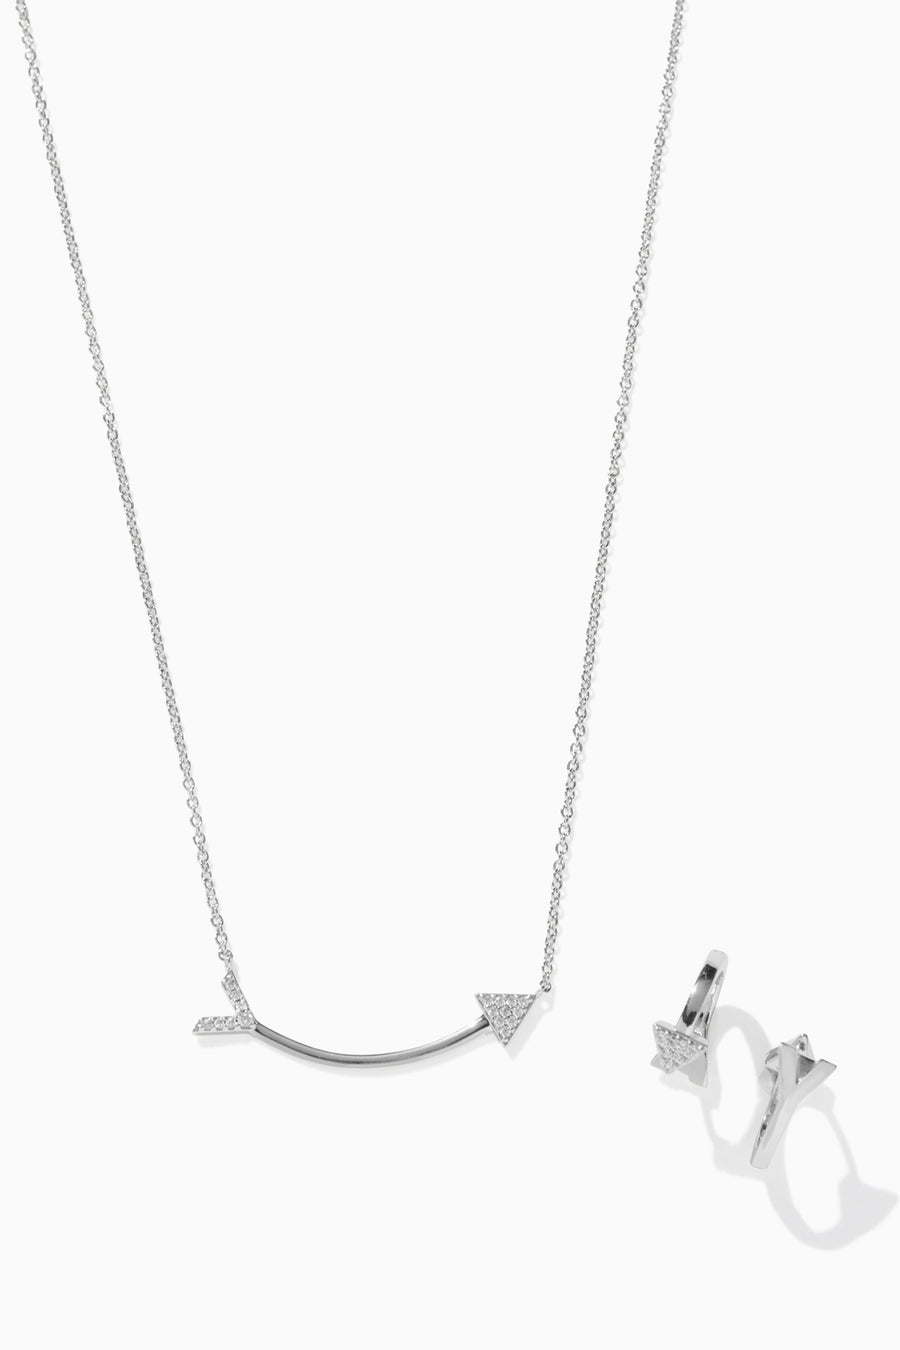 MBxSD Doubletake On the Mark Huggie and Necklace Set - Stella & Dot